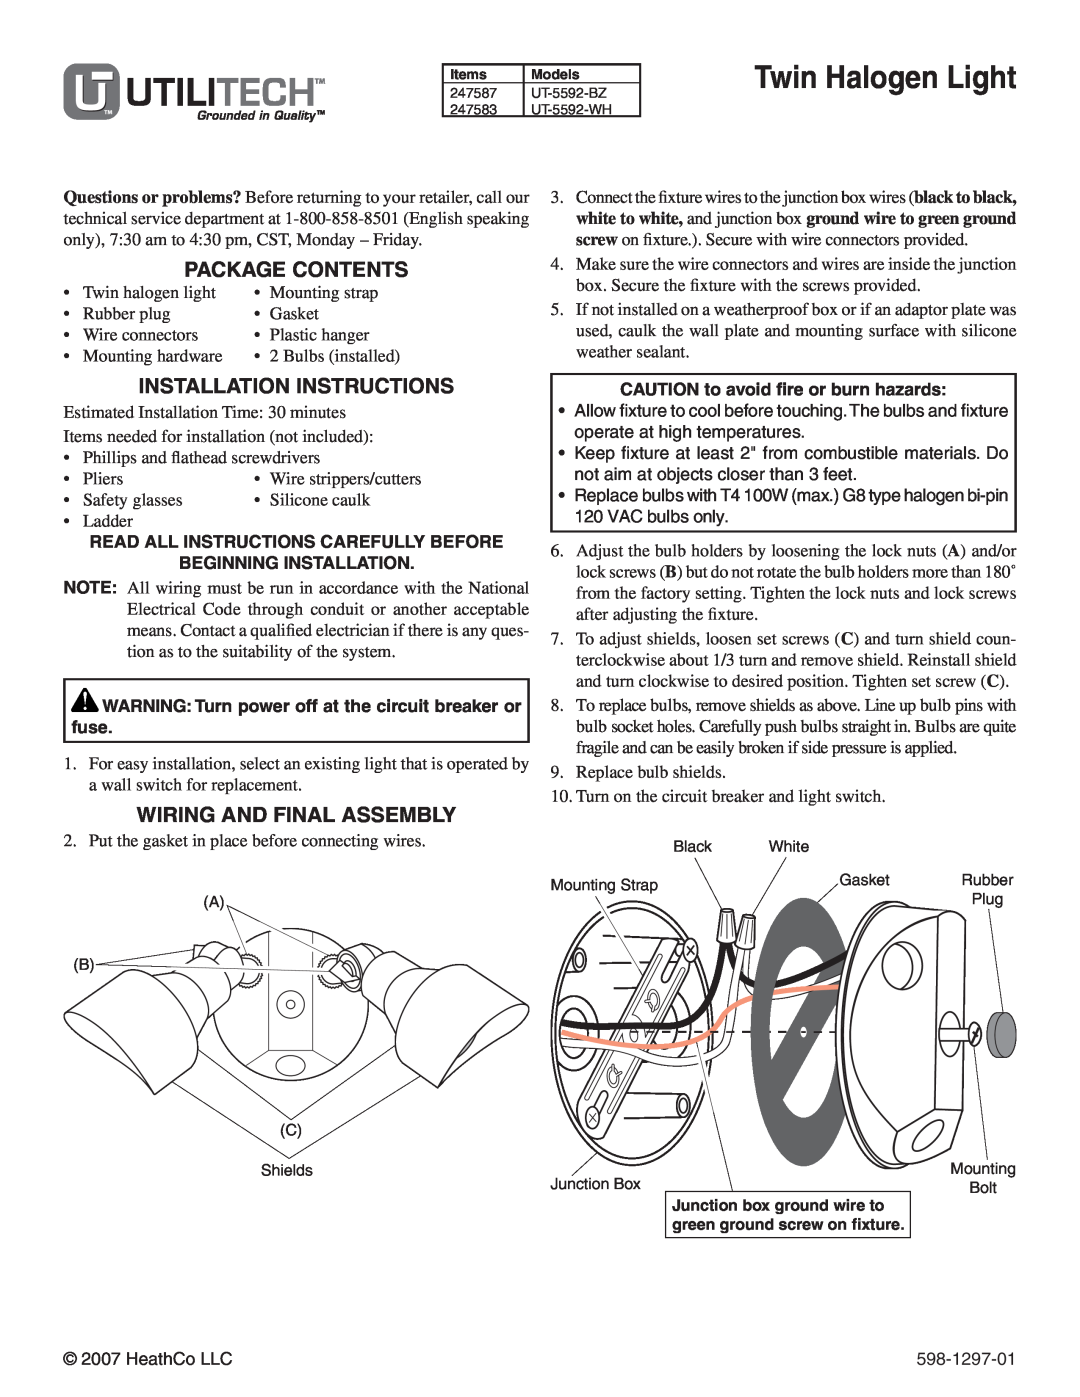 Heath Zenith UT-5592-WH installation instructions Twin Halogen Light, Package Contents, Installation Instructions 